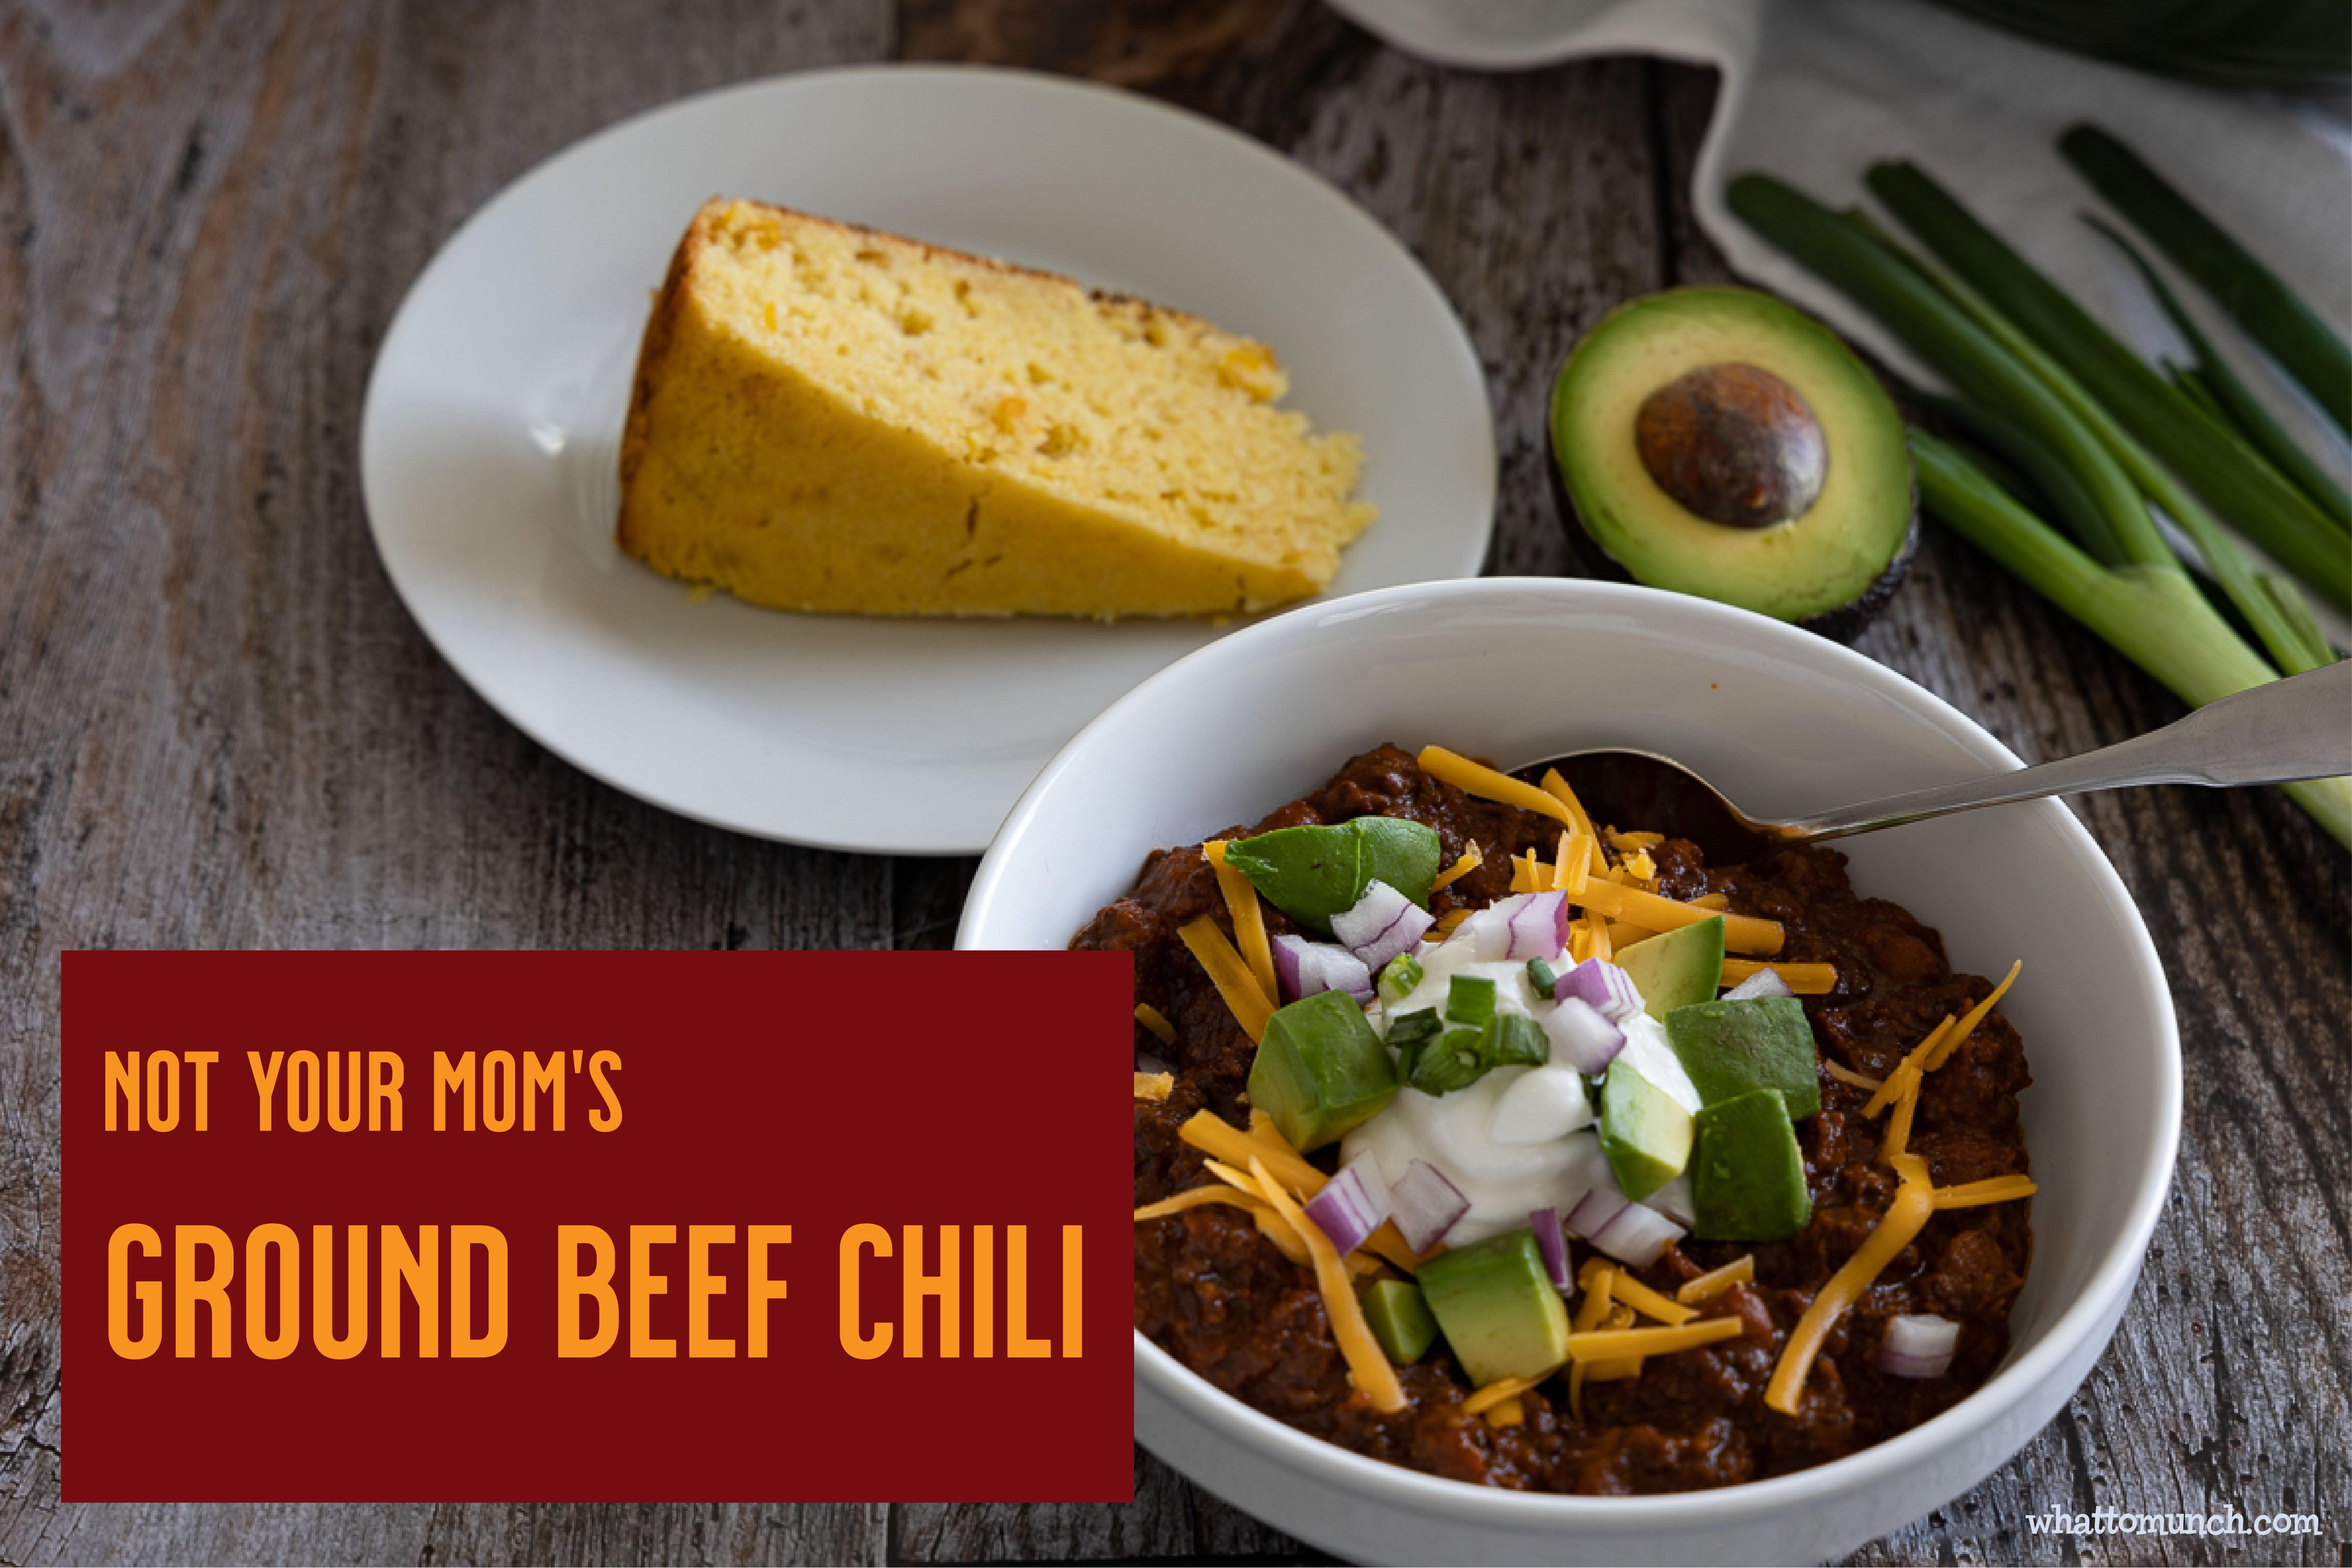 Not your mom's ground beef chili